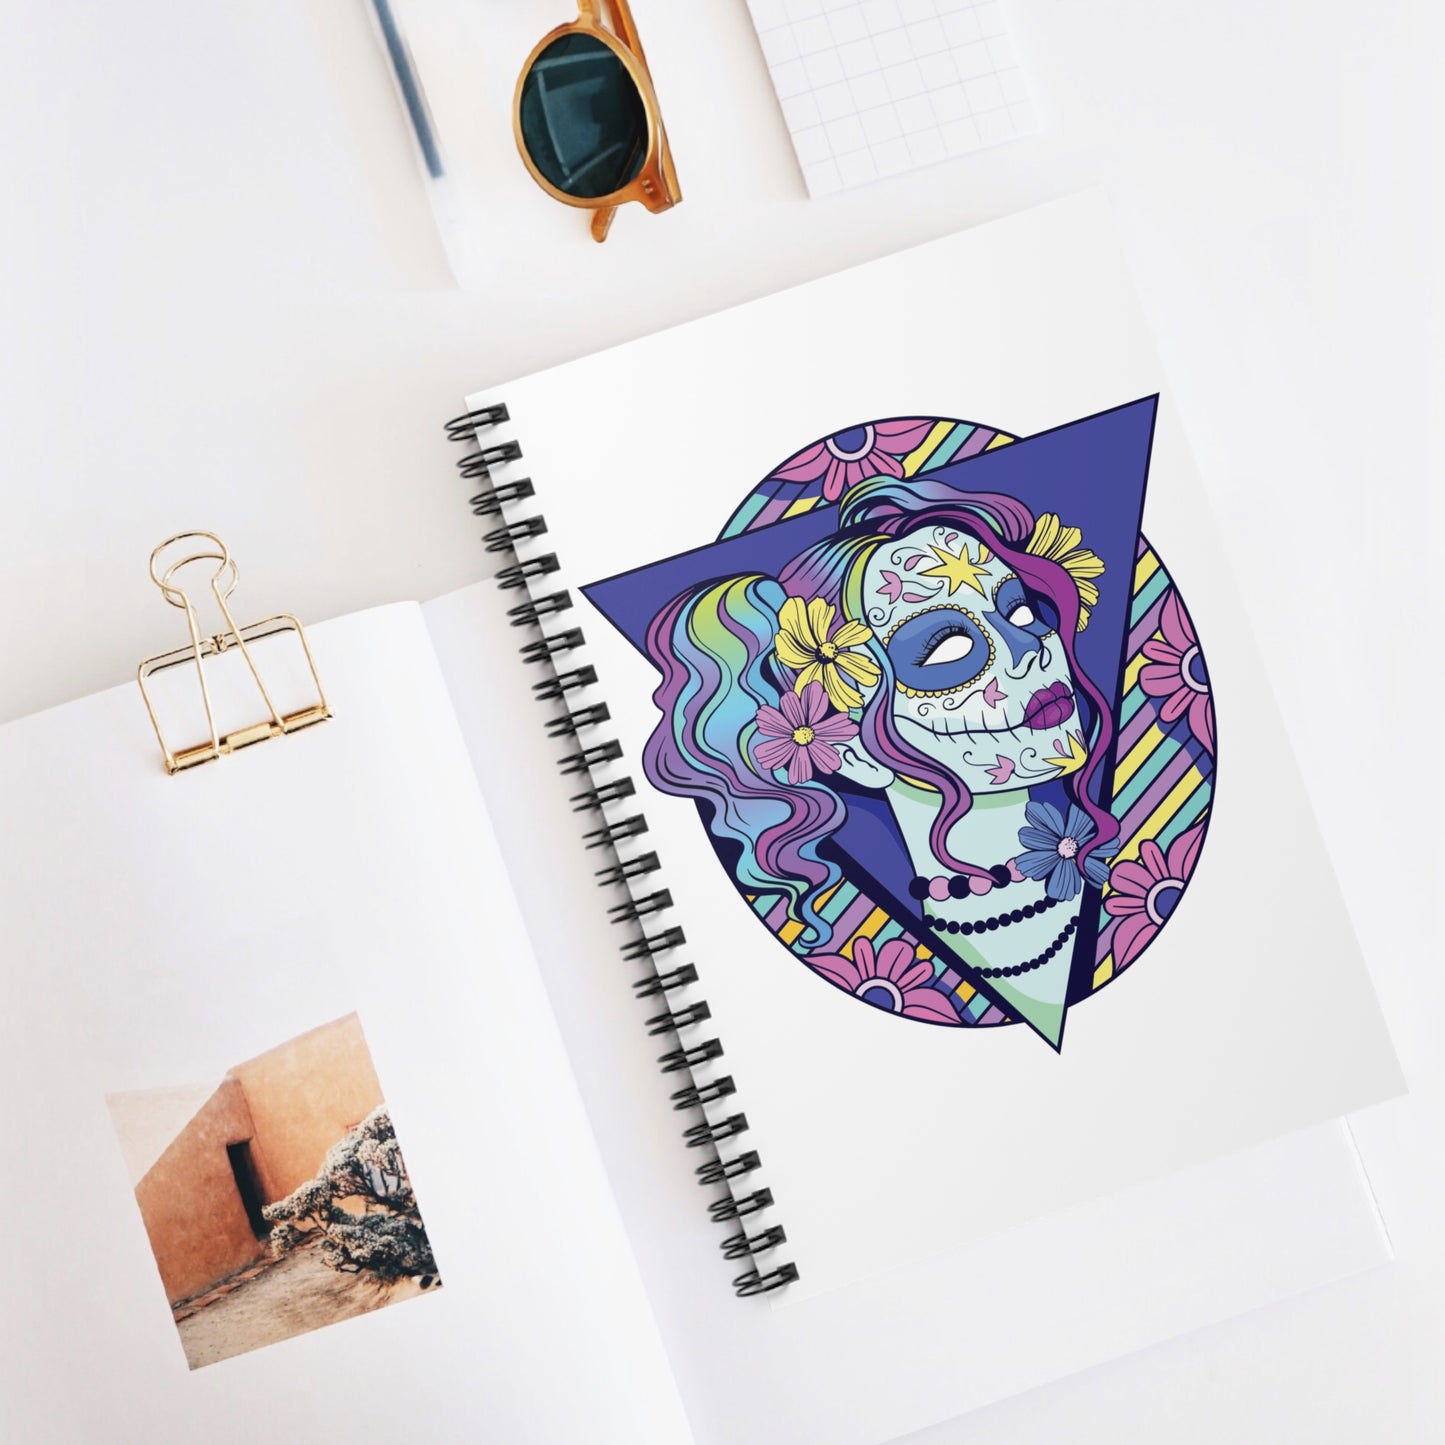 Candy Skull: Spiral Notebook - Log Books - Journals - Diaries - and More Custom Printed by TheGlassyLass